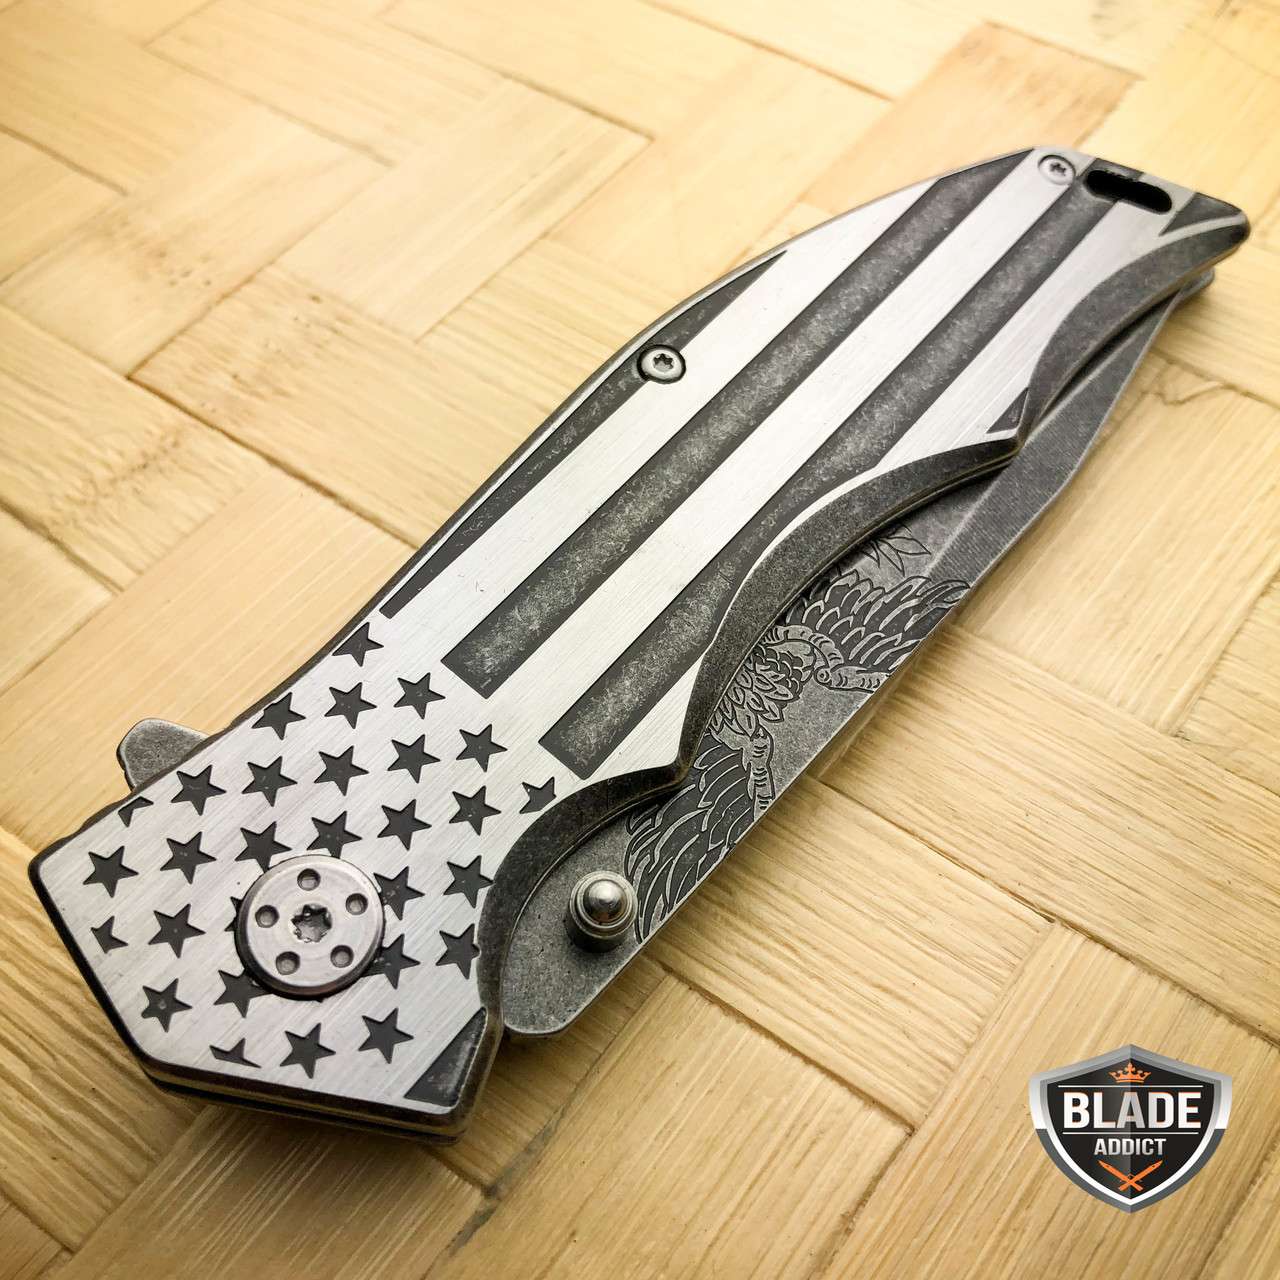 MTech USA American FLAG Spring Assisted Folding Open POCKET KNIFE ARMY PATRIOTIC Stonewash